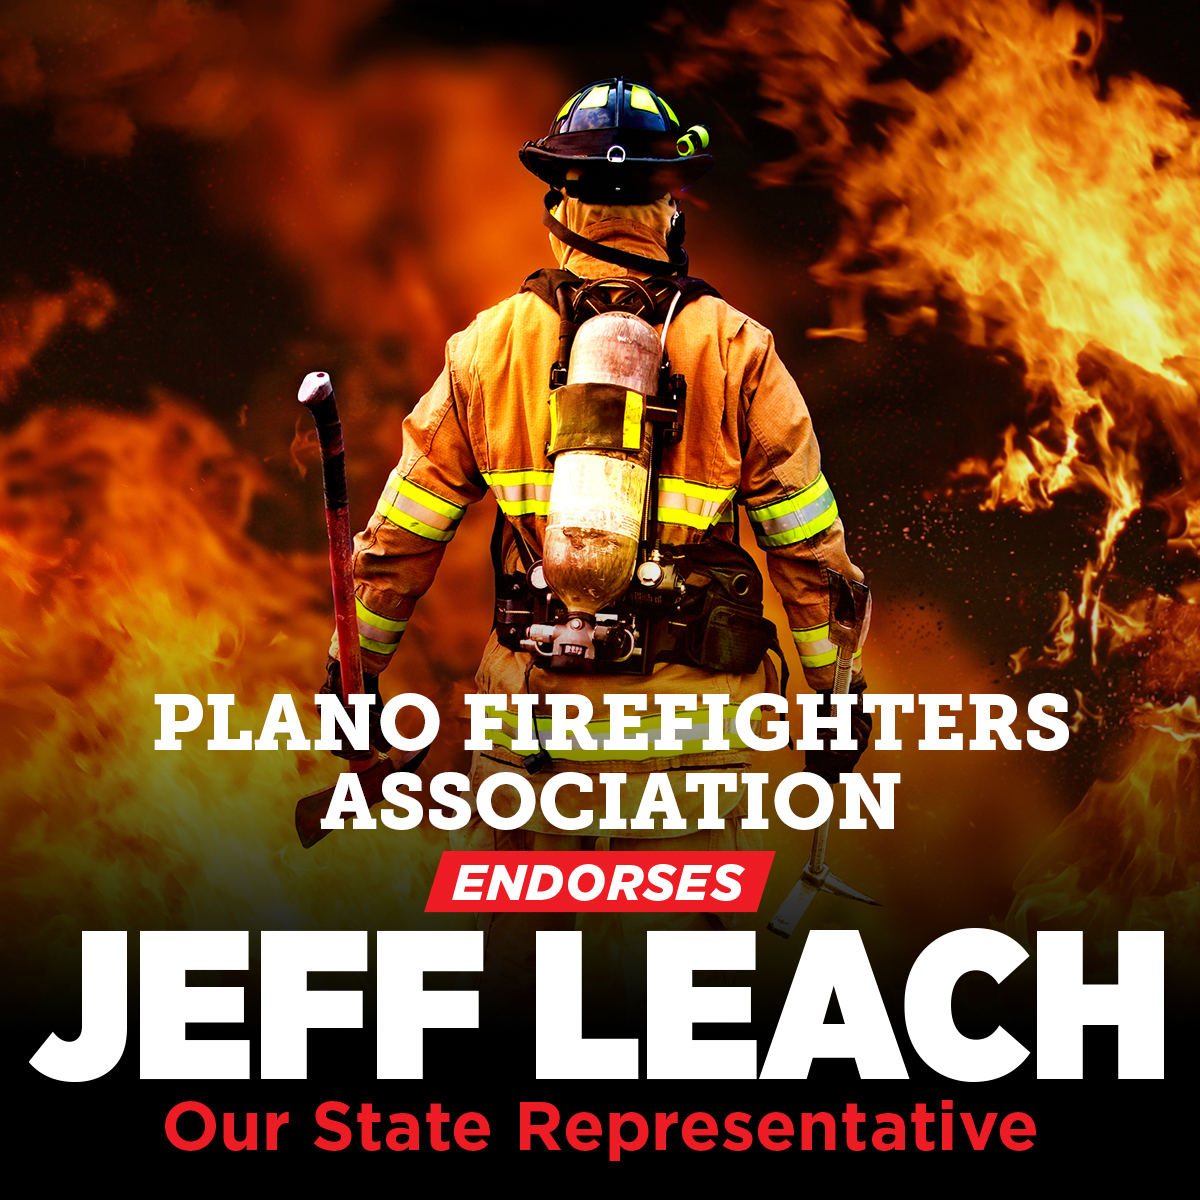 Plano Firefighters Association Endorses State Rep. Jeff Leach